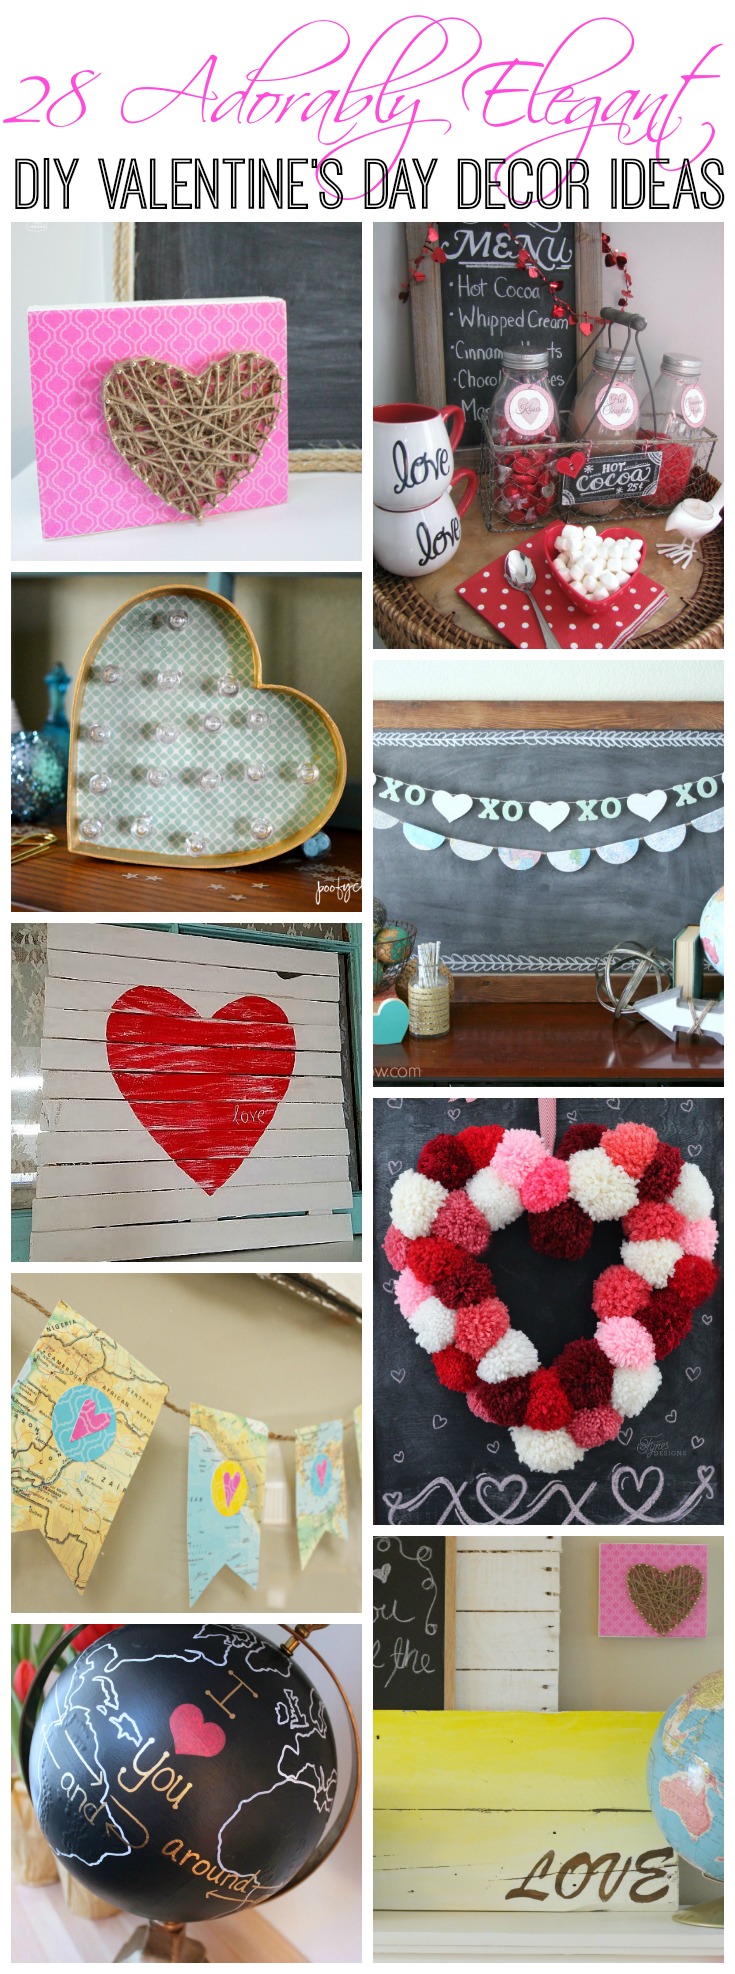 Find all kinds of Valentine's Day decorating Inspiration with these 28 adorably elegant DIY Valentine's Day Decor Ideas at The Happy Housie